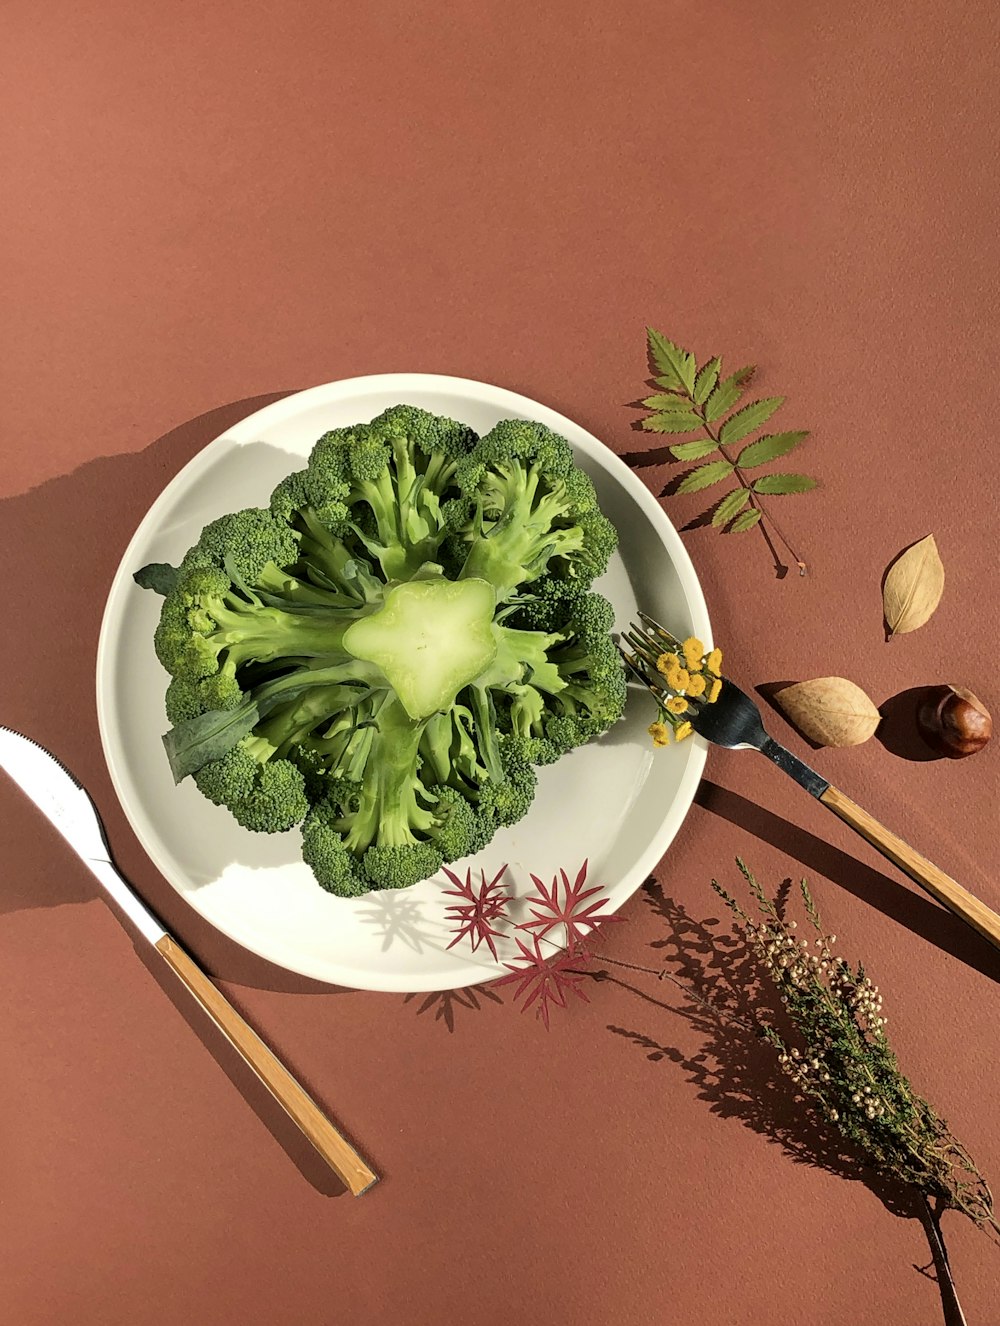 a plate of broccoli and spoons